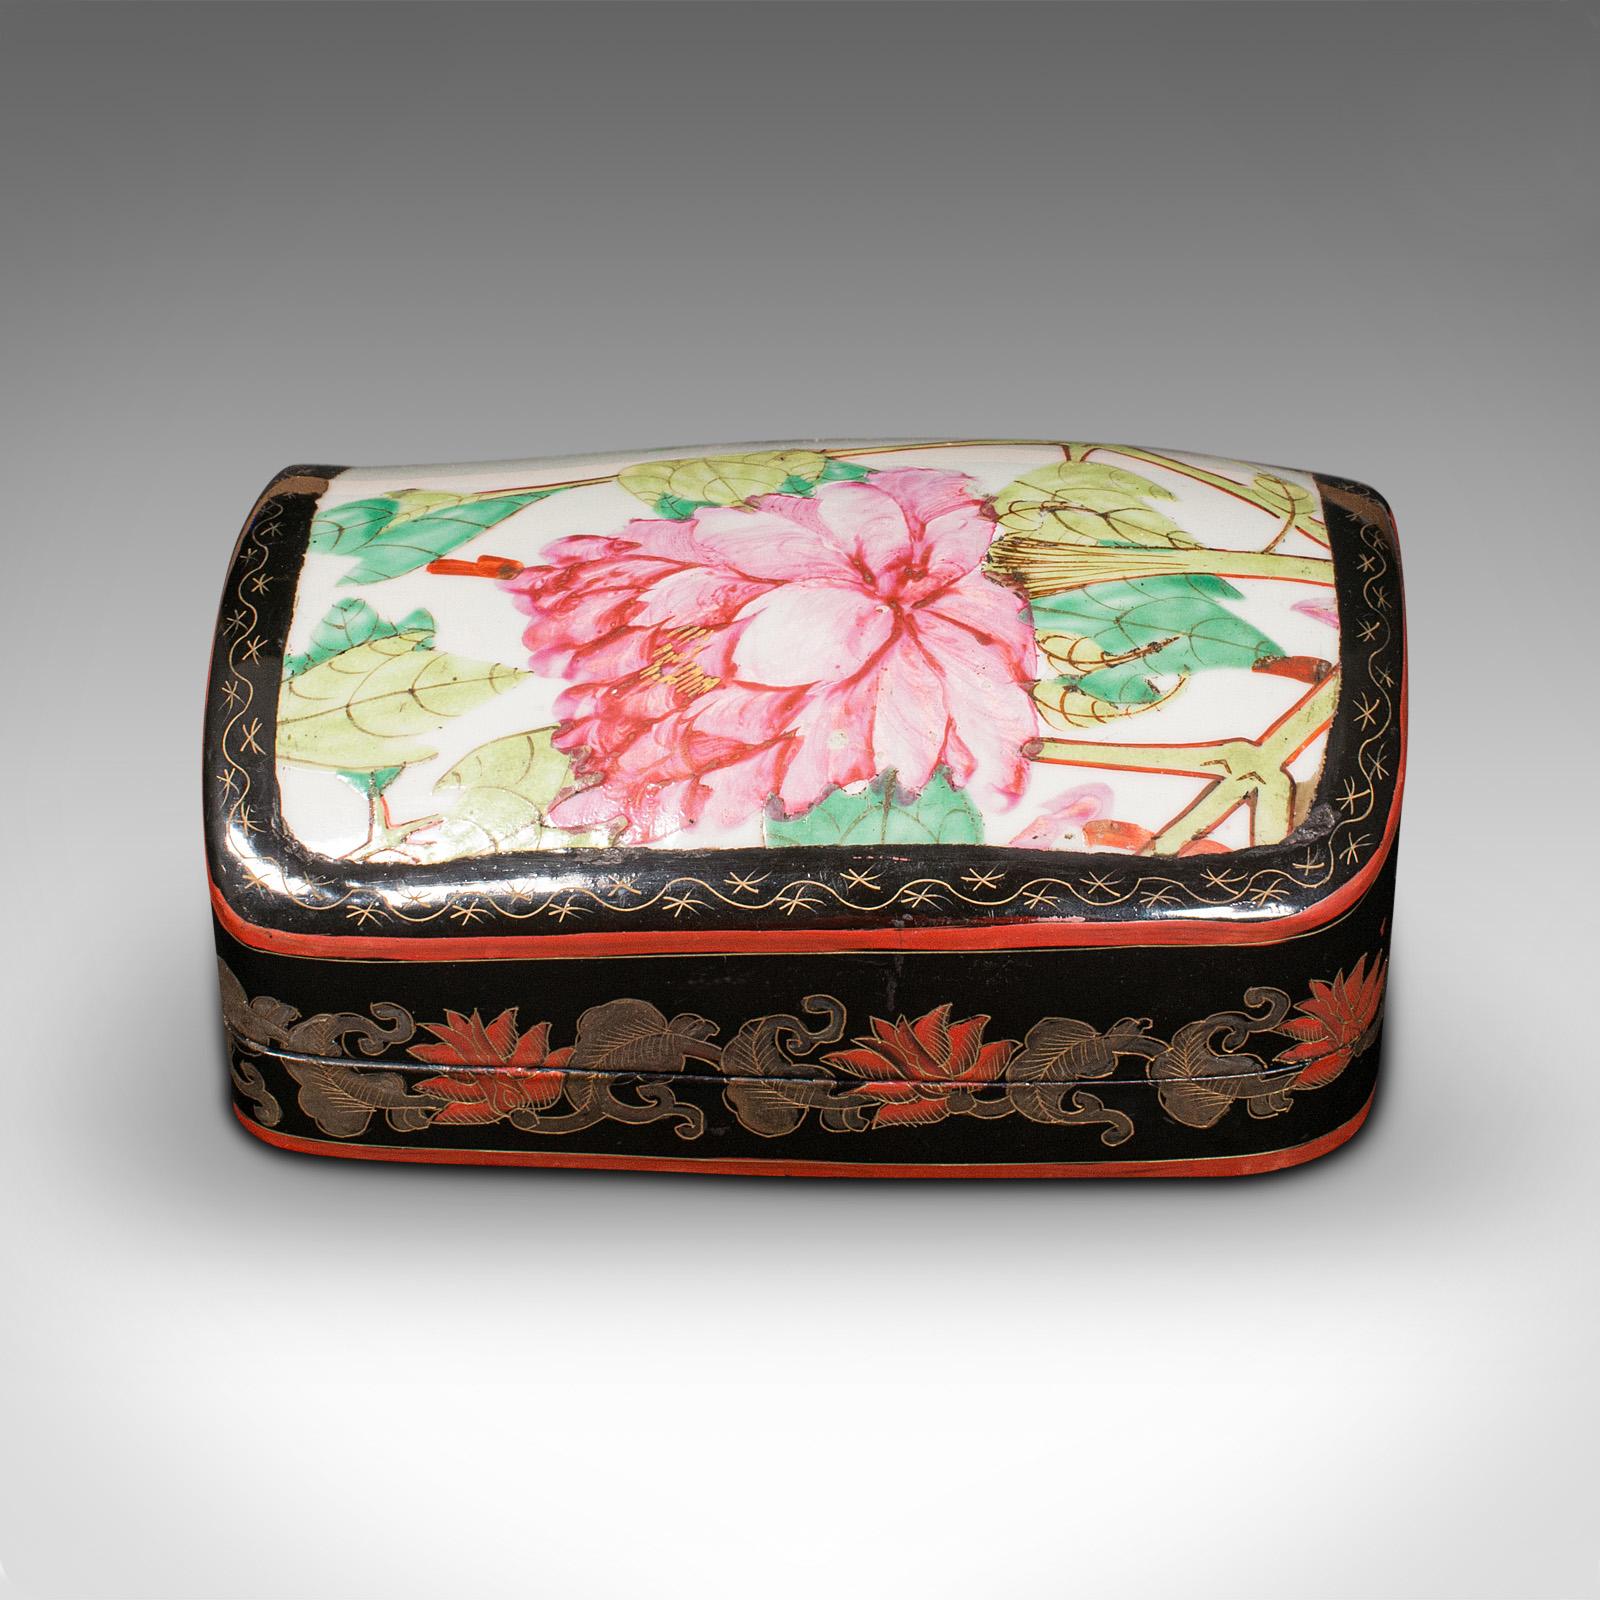 Vintage Dome Top Box, Oriental, Japanned, Trinket, Jewellery Case, Late Art Deco In Good Condition For Sale In Hele, Devon, GB